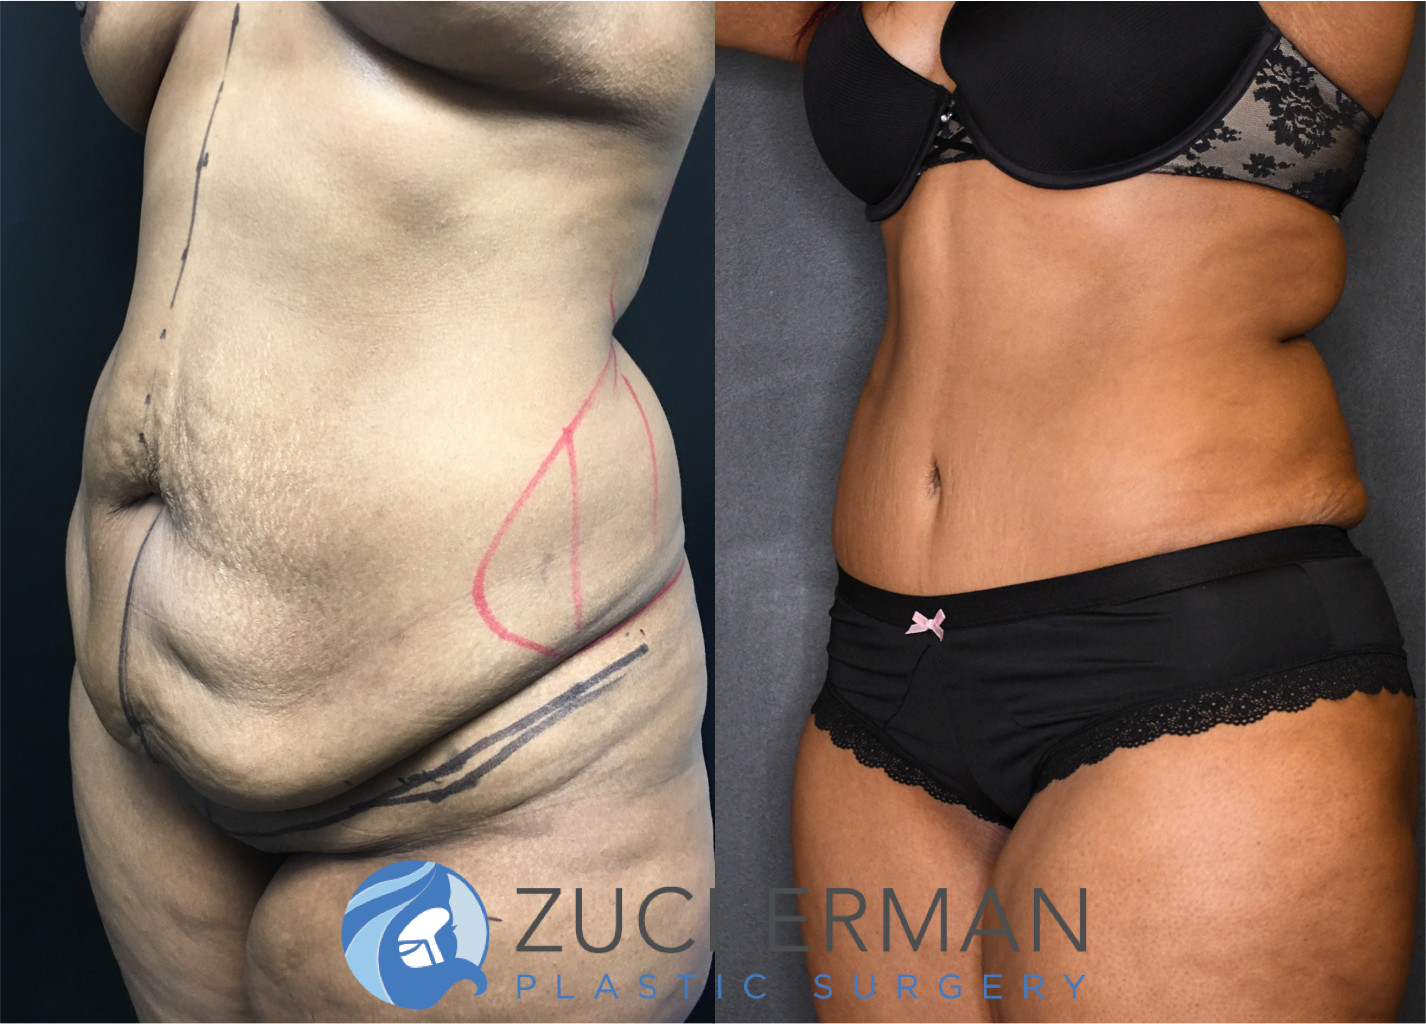 Cosmetic Body Surgery Before and After Image Gallery – Top Ranked Zuckerman  Plastic Surgery